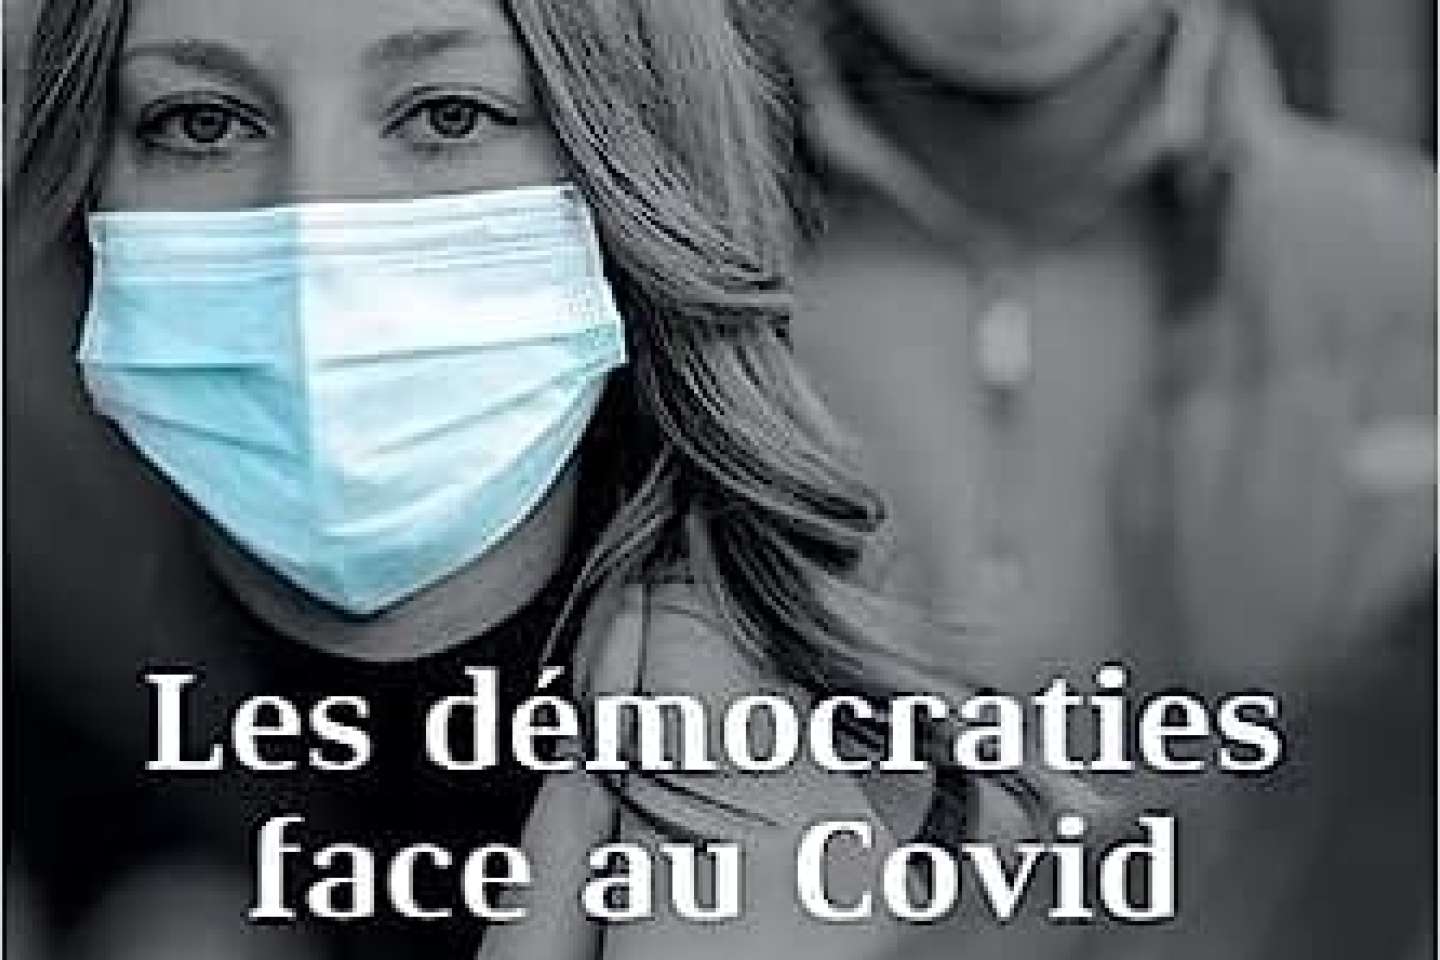 “Democracies facing Covid”: when the health crisis restricts public freedoms